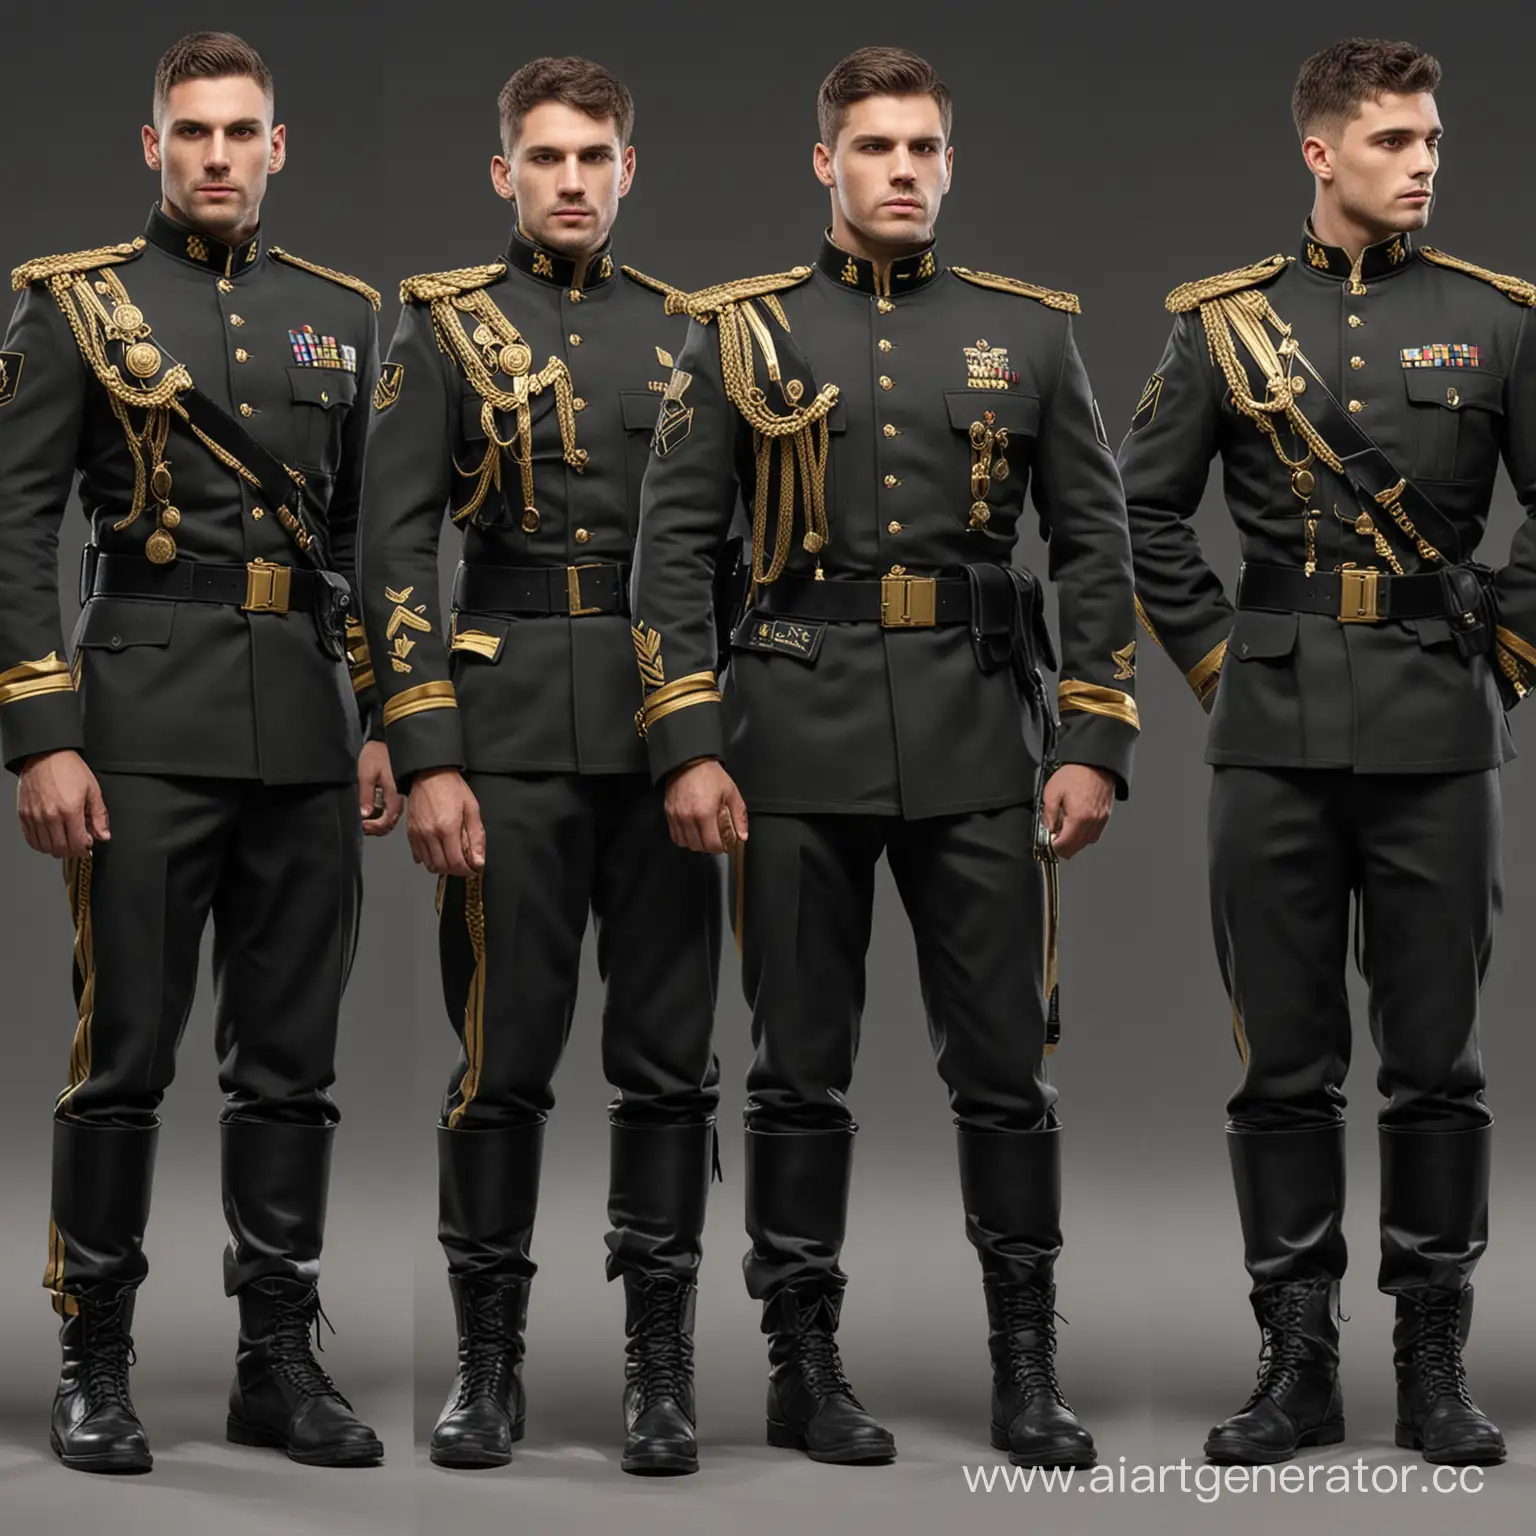 Kaedes-Private-Military-Organization-Soldiers-Uniform-in-Black-Gold-and-Gray